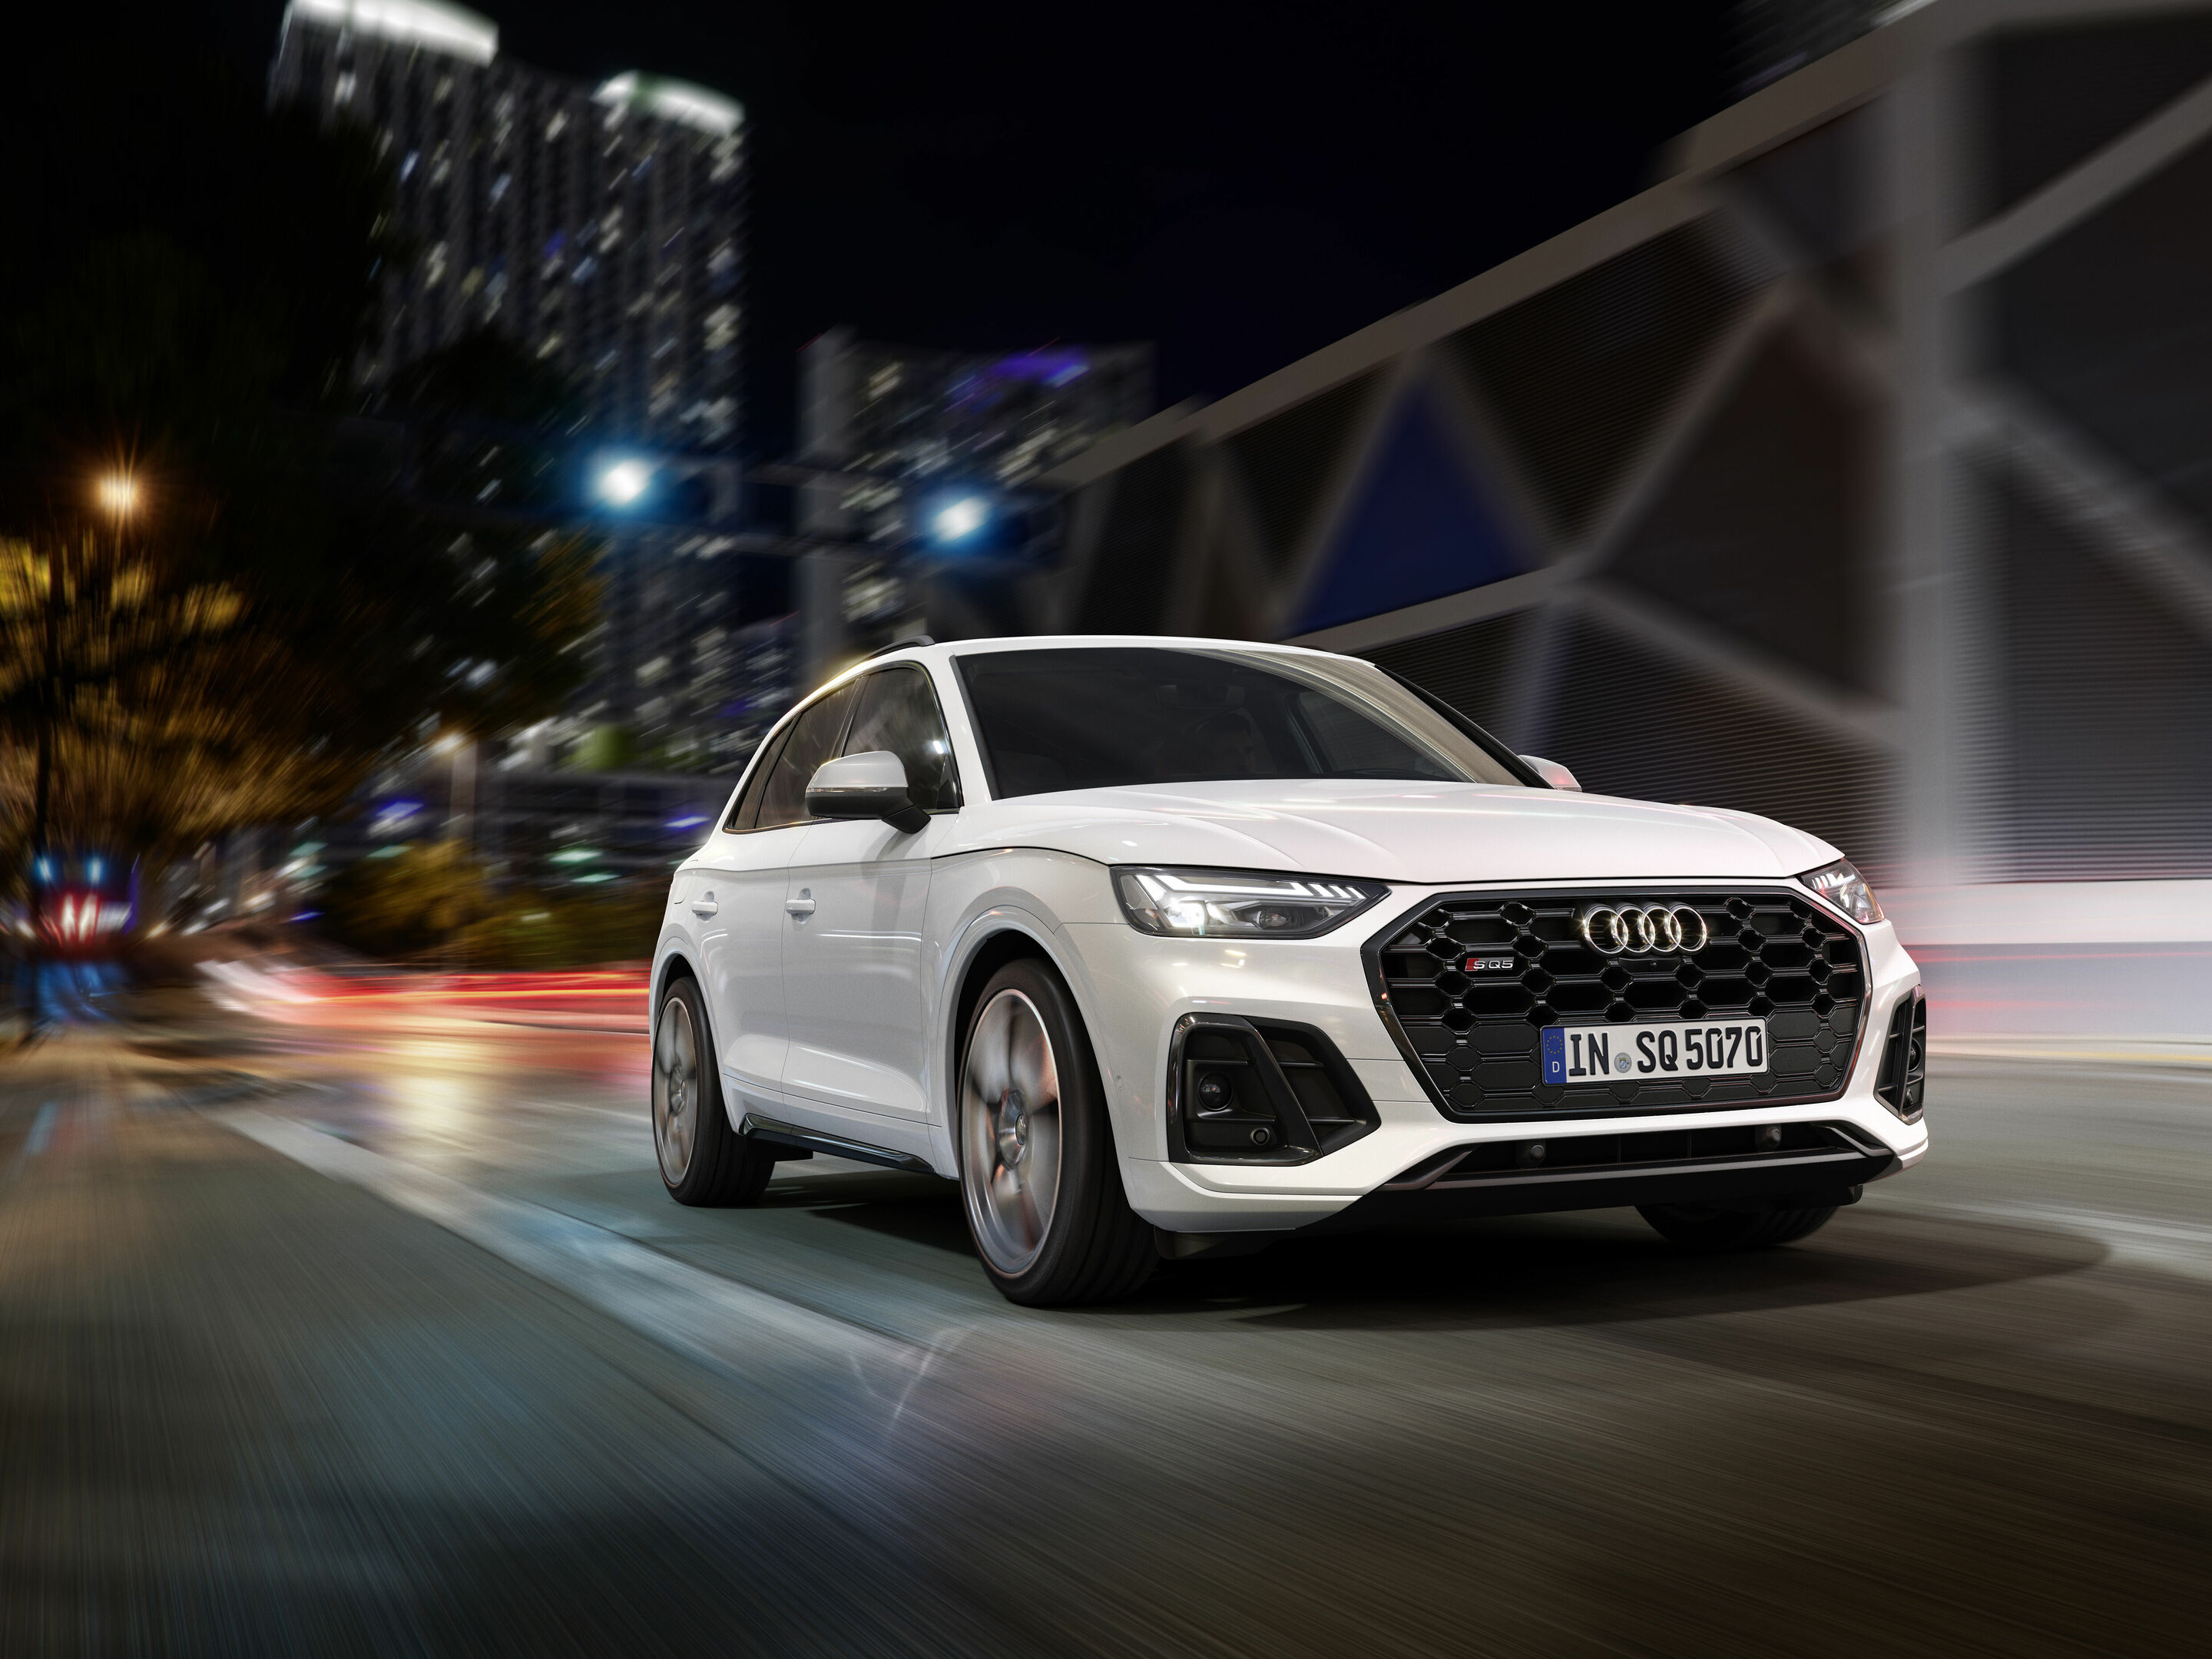 Sporty, powerful, and efficient: Audi presents the new generation